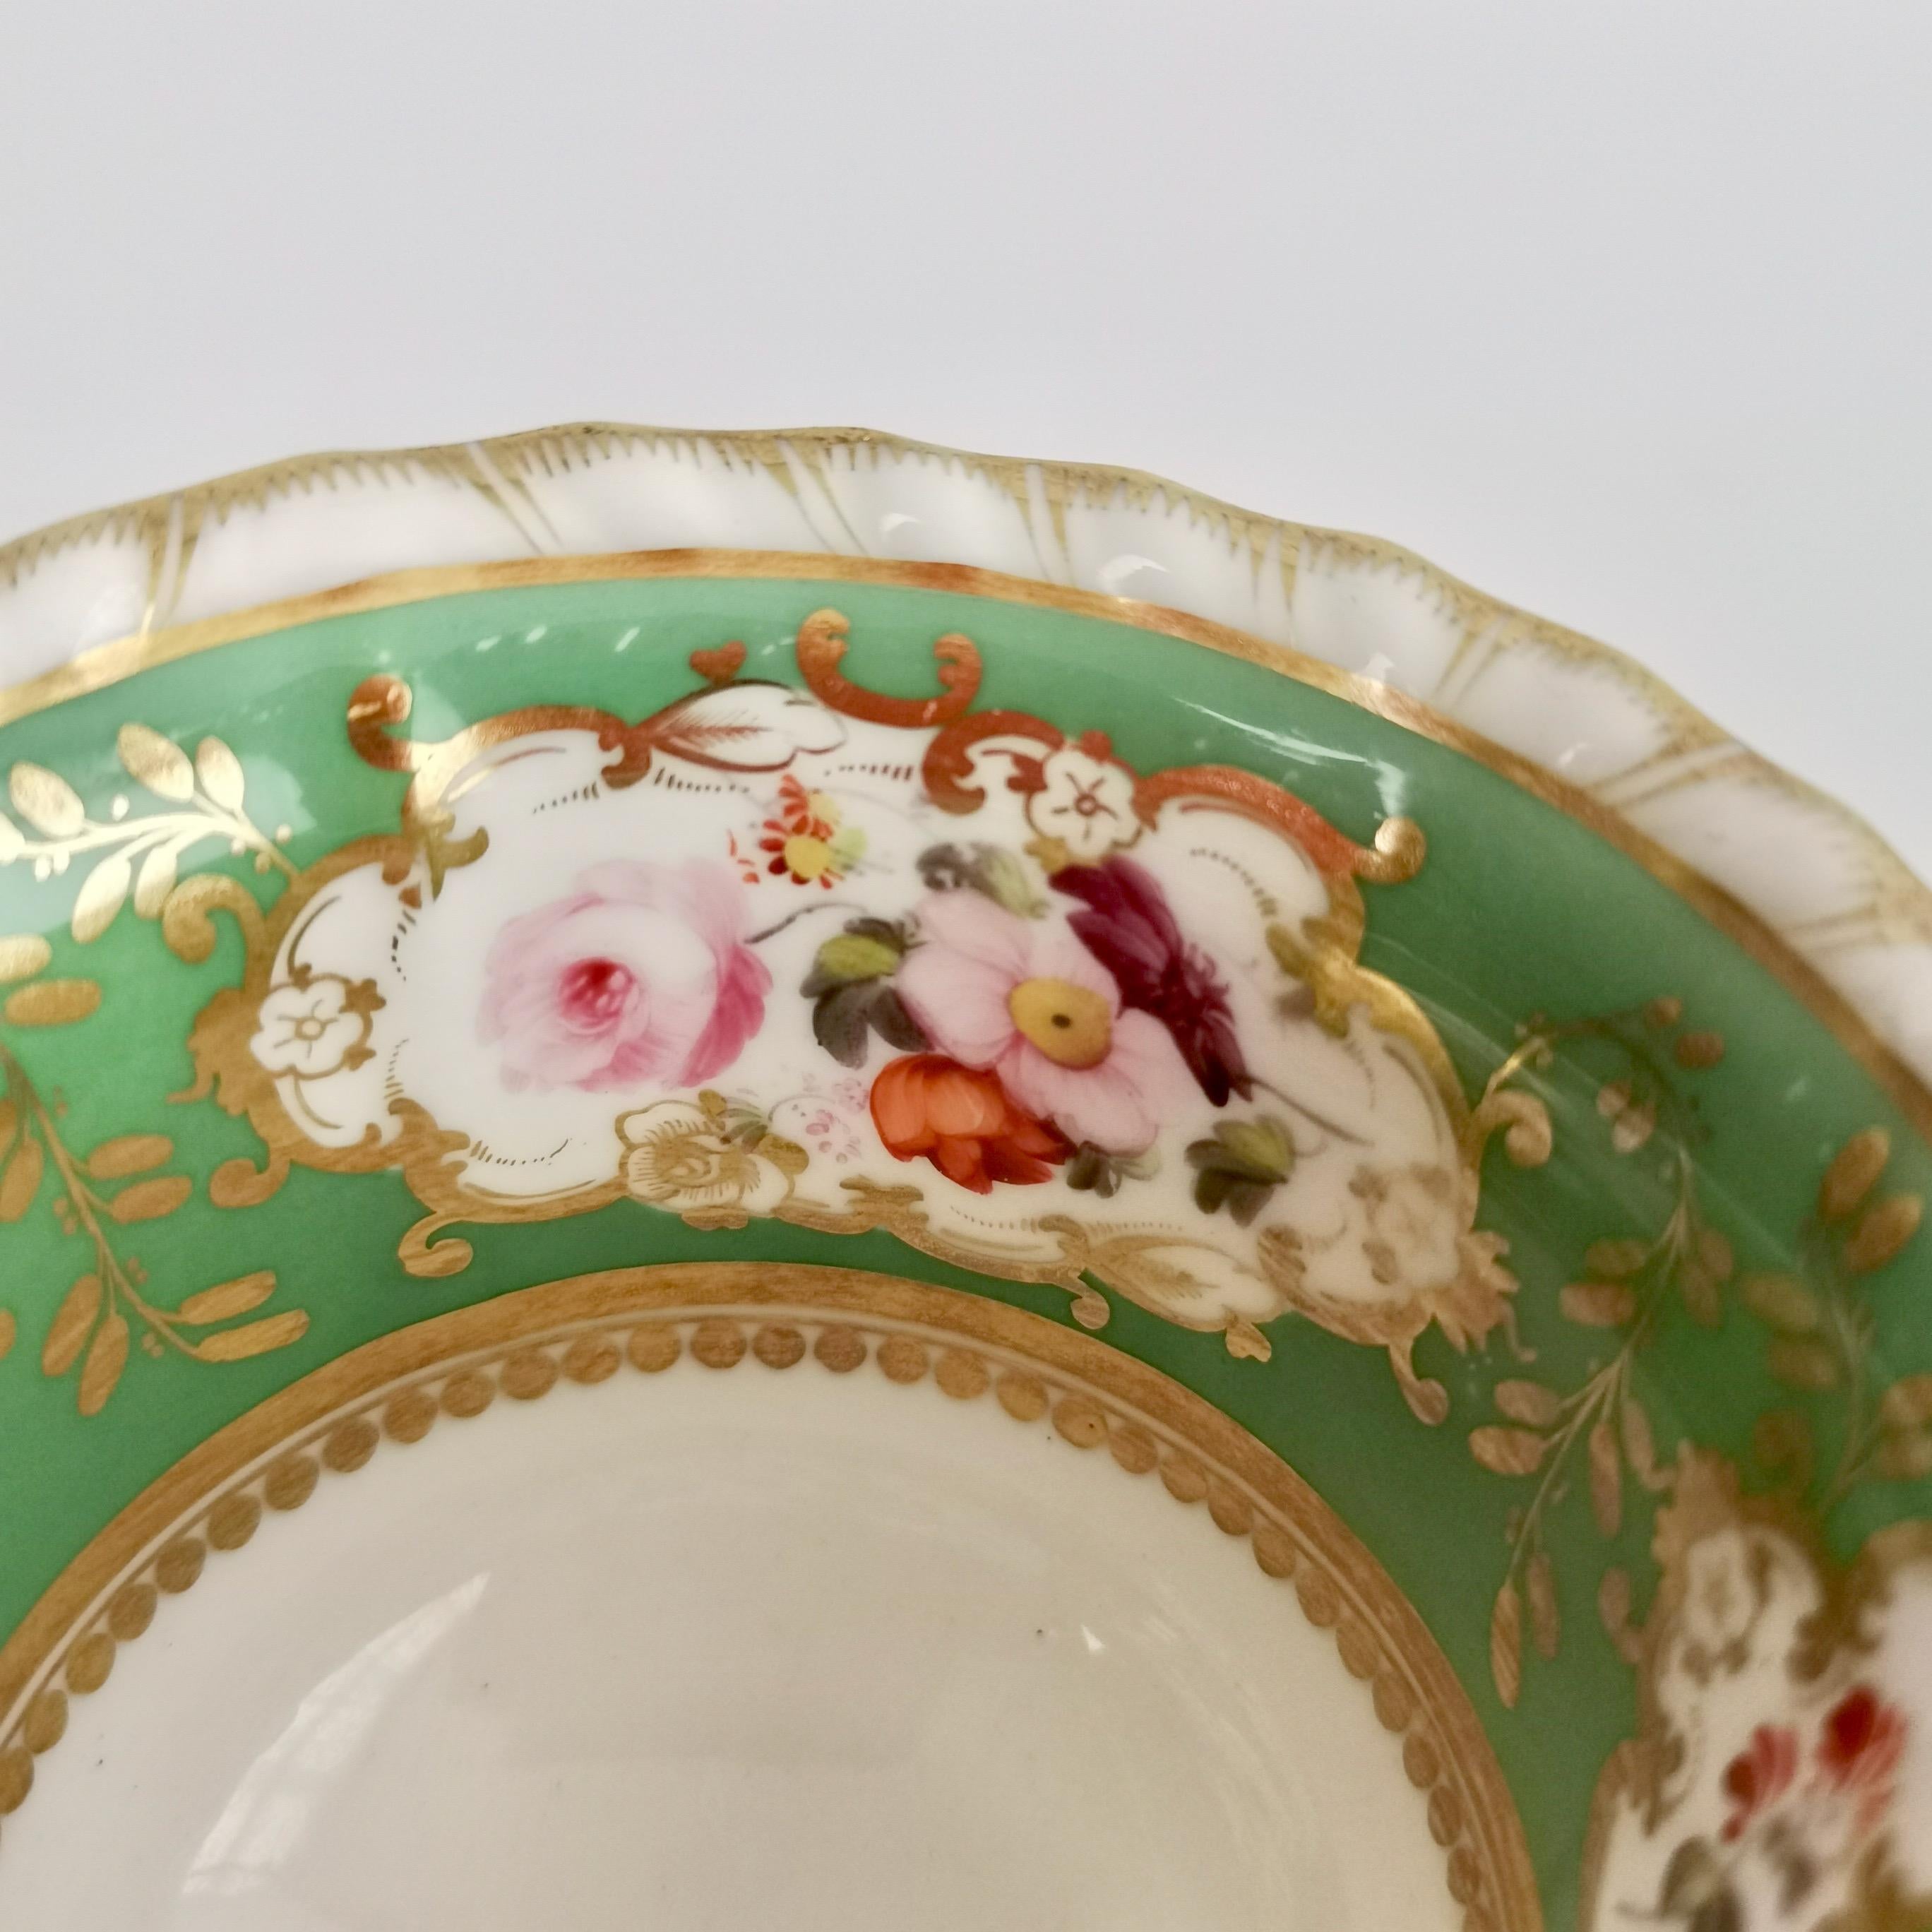 Hand-Painted Minton Porcelain Orphaned Coffee Cup, Green with Flowers, ca 1825